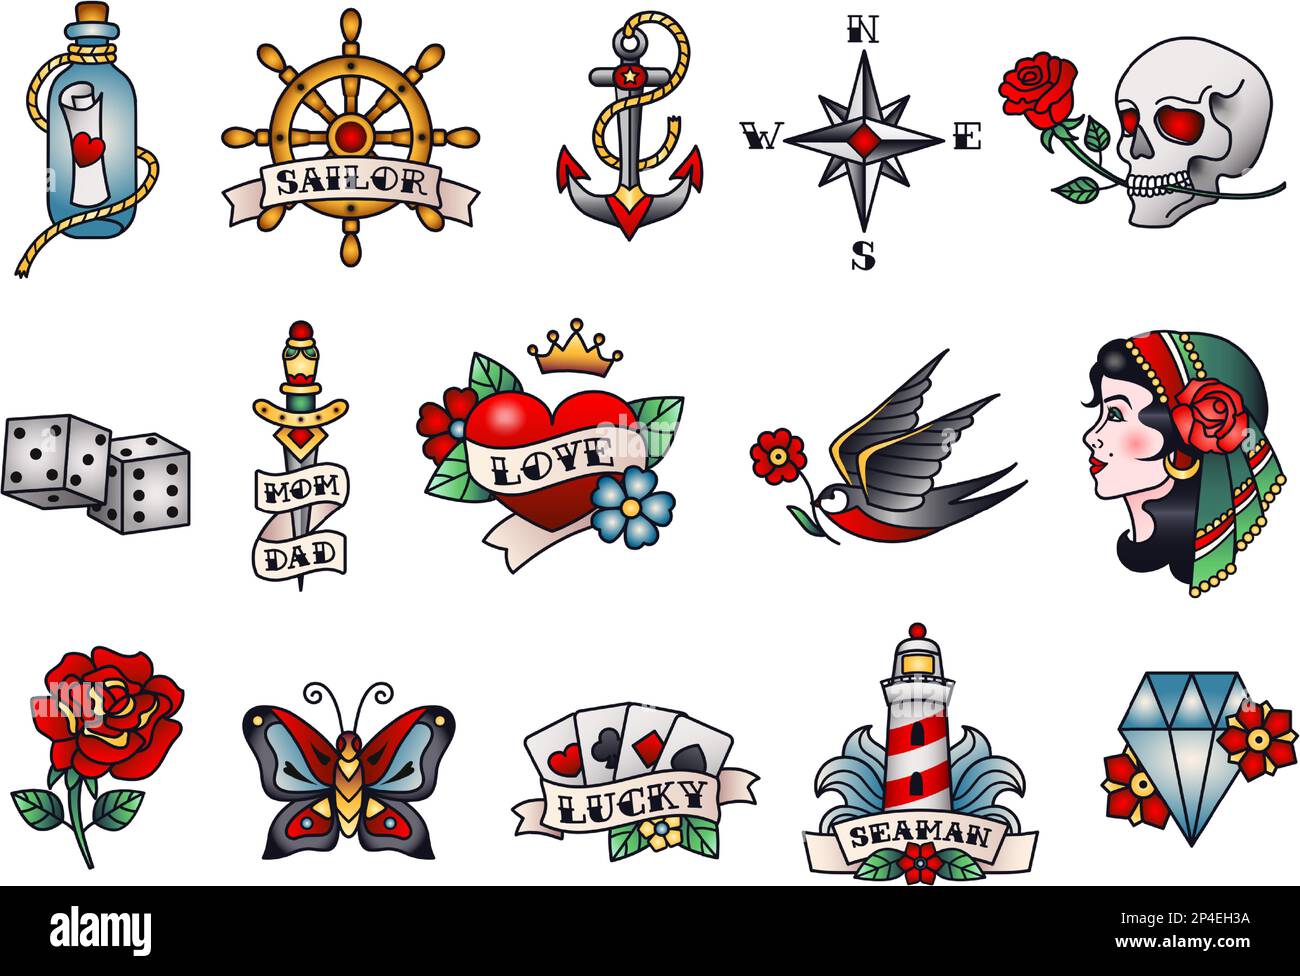 HD sailor jerry tattoos wallpapers | Peakpx